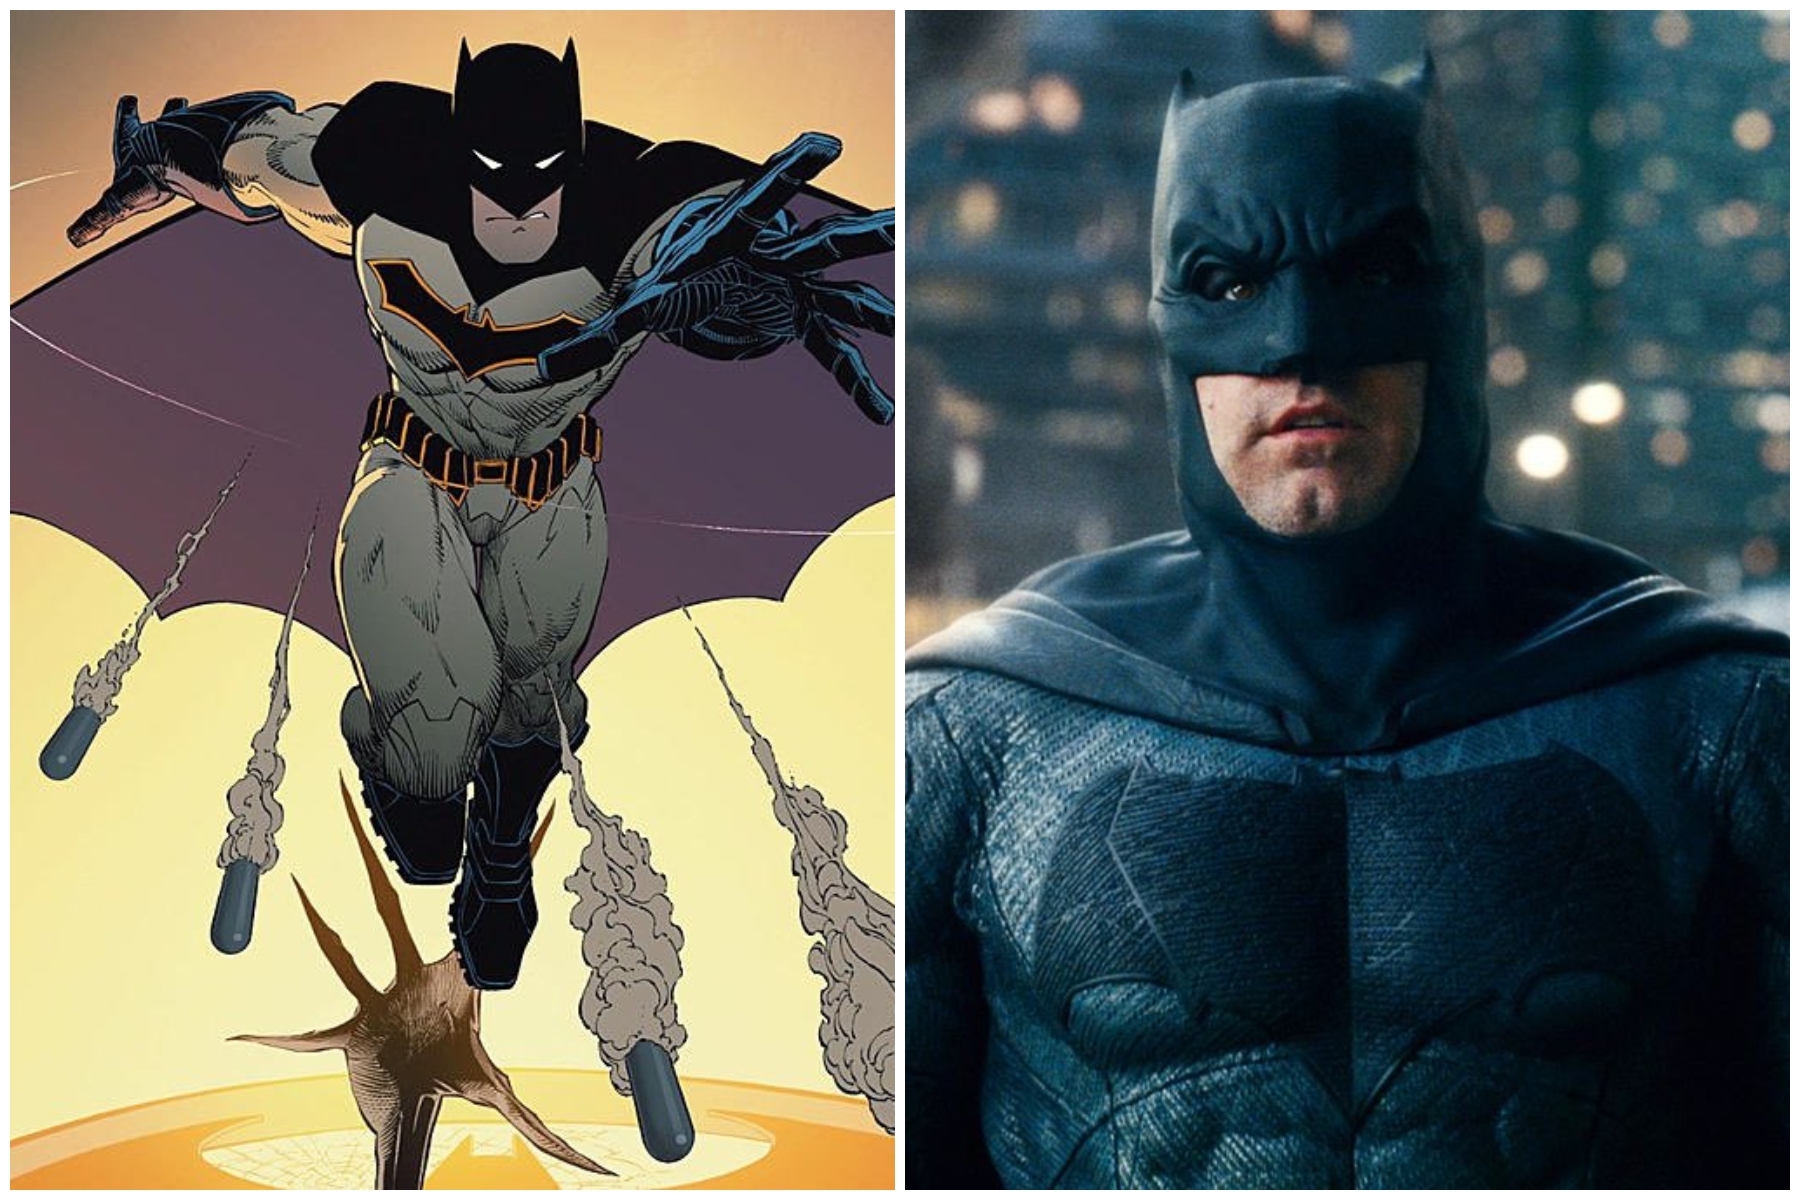 The original inspiration for Batman's cape came from a sketch by whom?